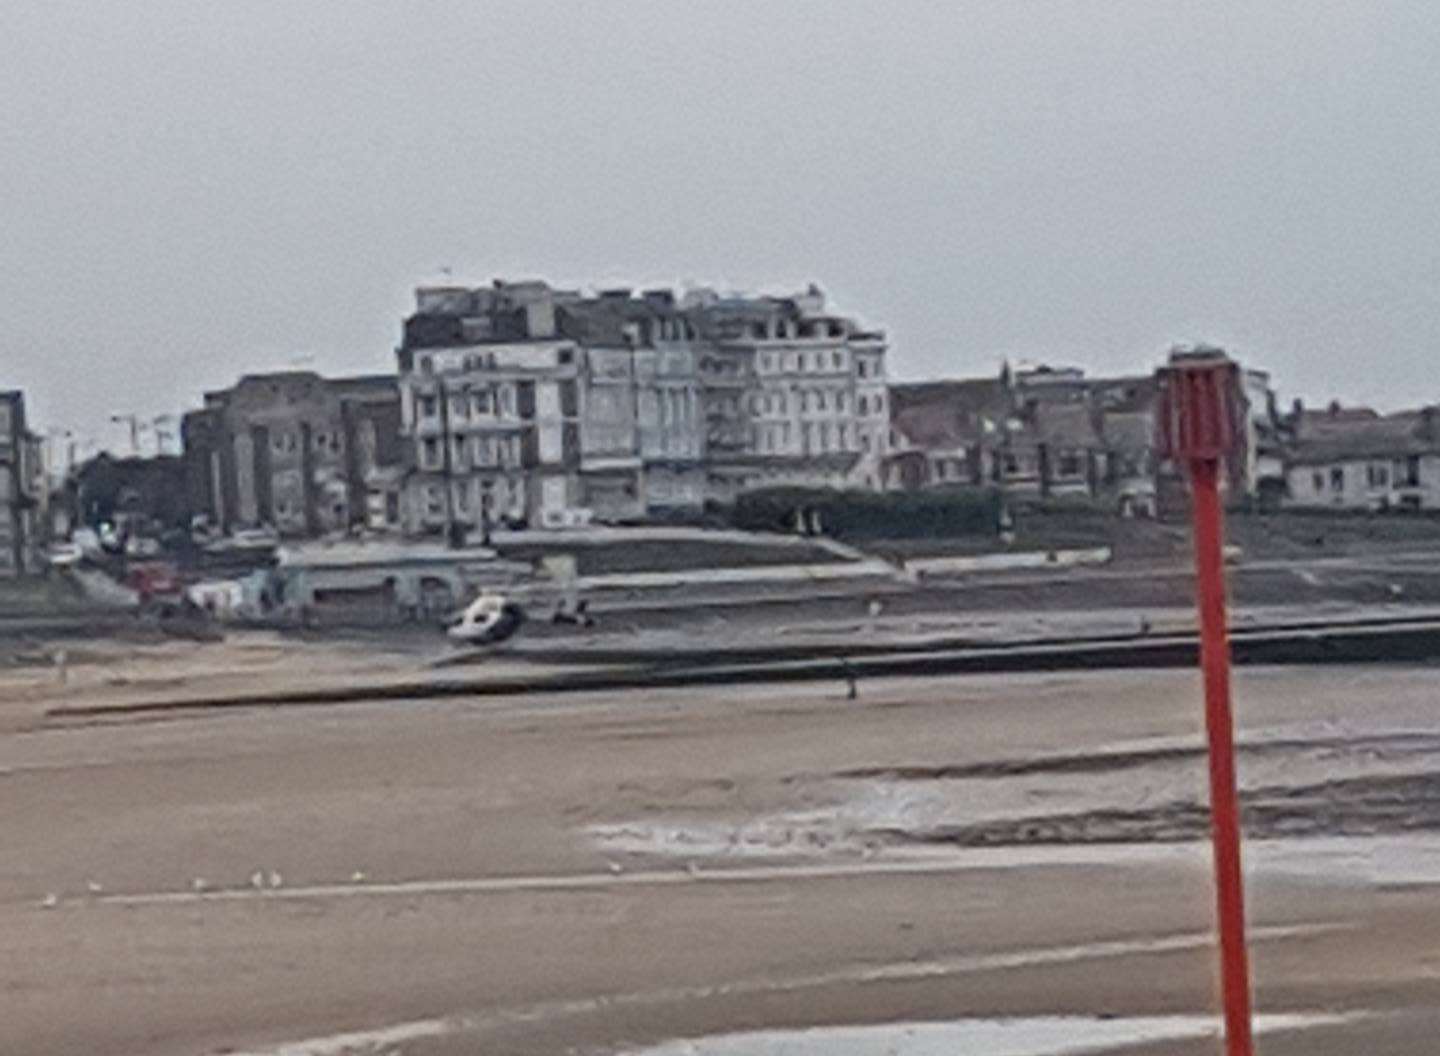 The air ambulance landed at Margate seafront. Picture: Nadine Fullarton